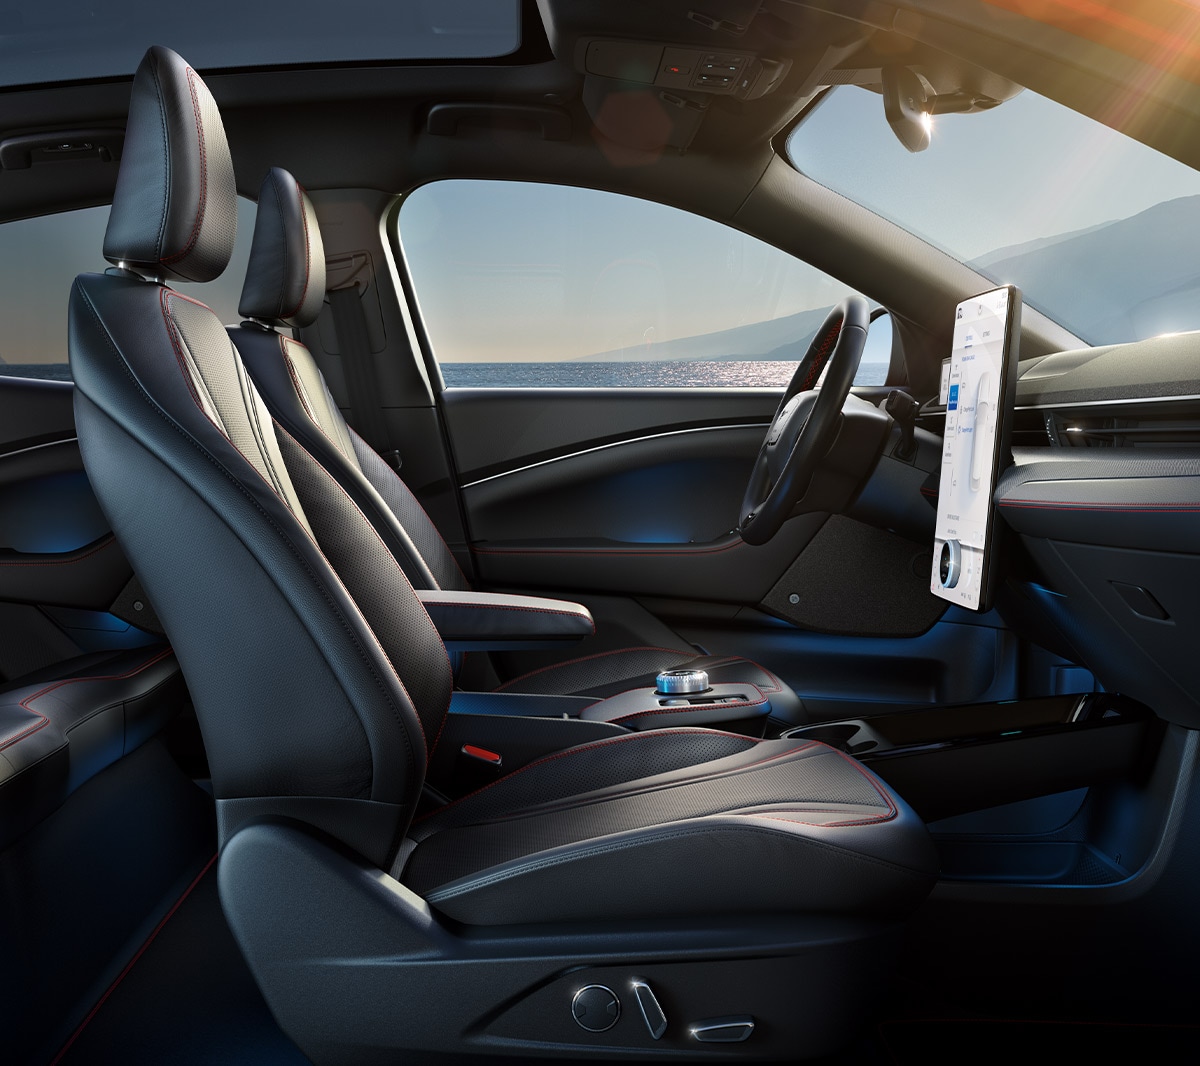 All-New Ford Mustang Mach-E interior with front seats and Next Generation Ford SYNC